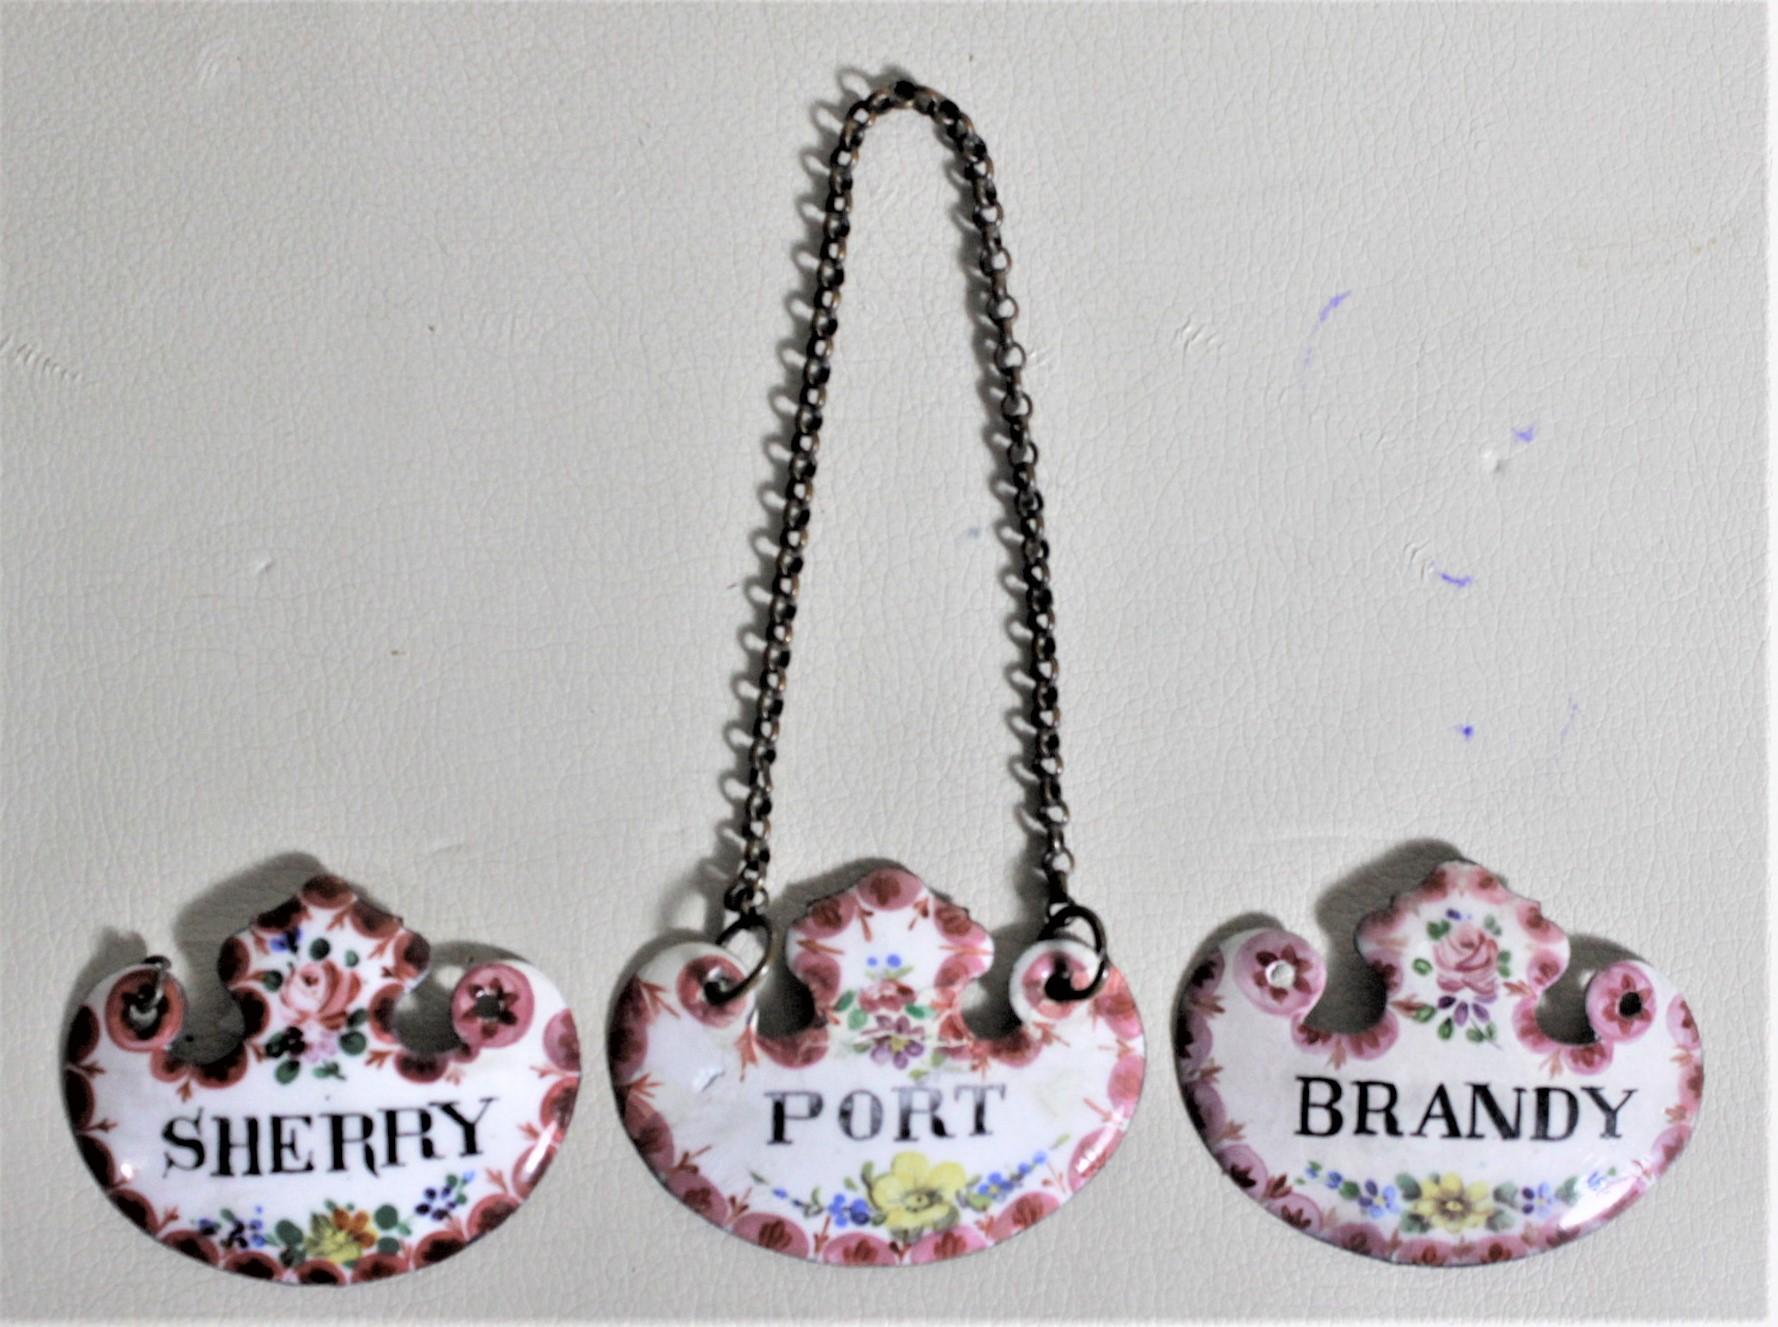 This set of three enameled liquor bottle tags are unsigned, but believed to have been made in the United States in circa 1940 in the Victorian style. The tags are done in a shield shape of enameled metal with hand-painted flowers bordering the label